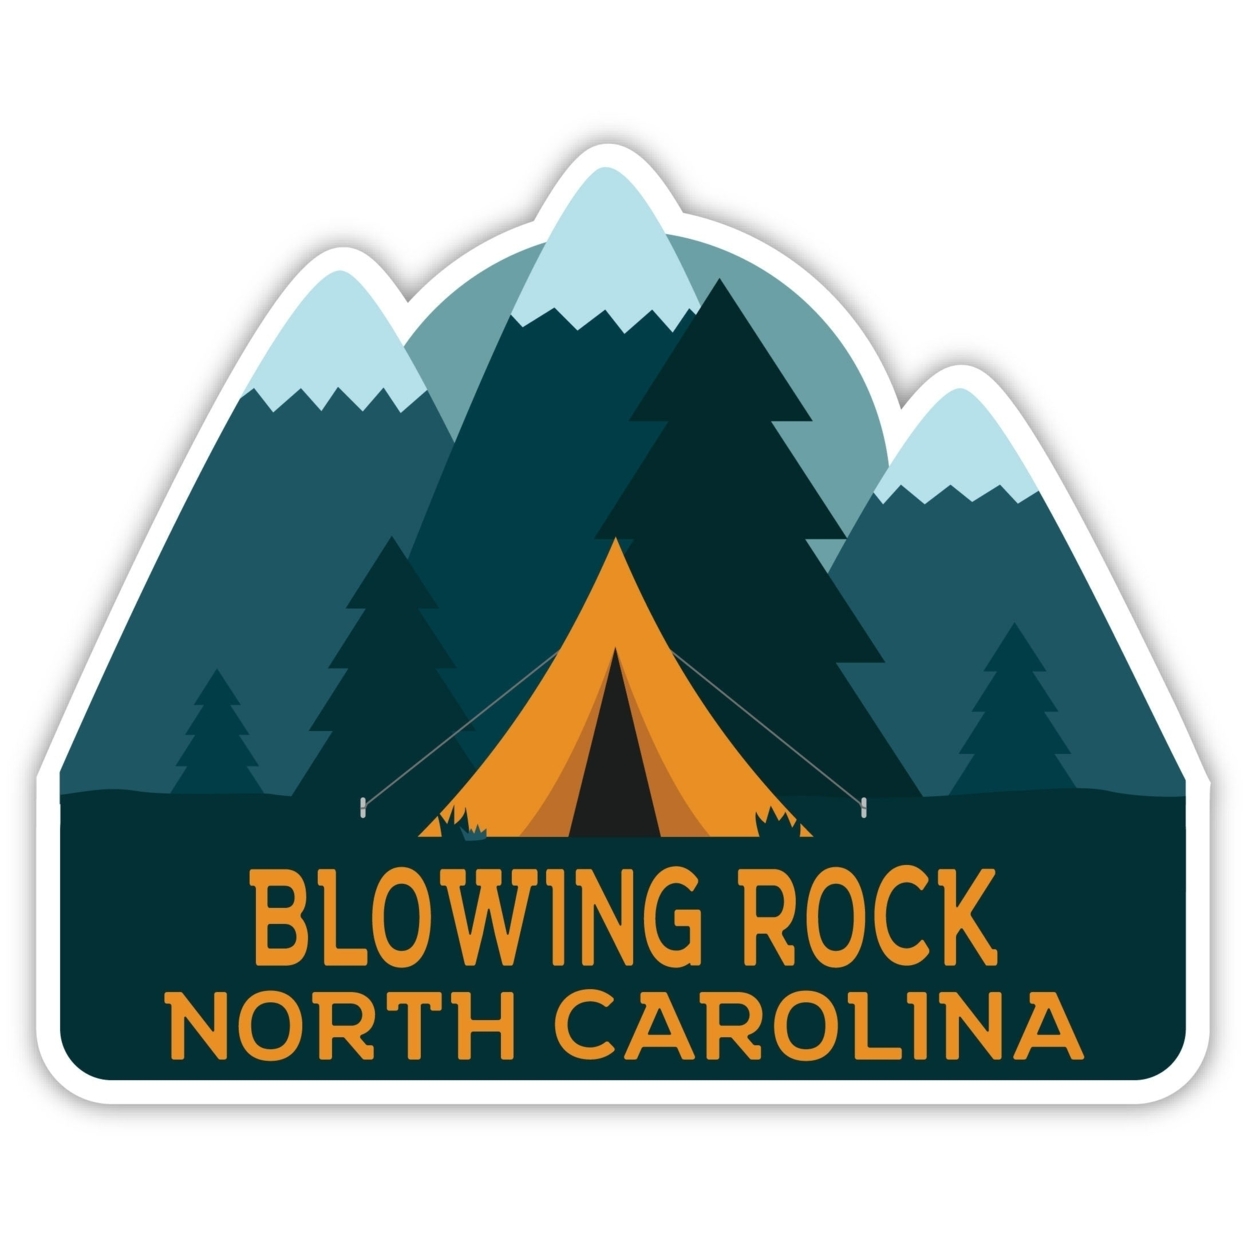 Blowing Rock North Carolina Souvenir Decorative Stickers (Choose Theme And Size) - 4-Pack, 6-Inch, Camp Life